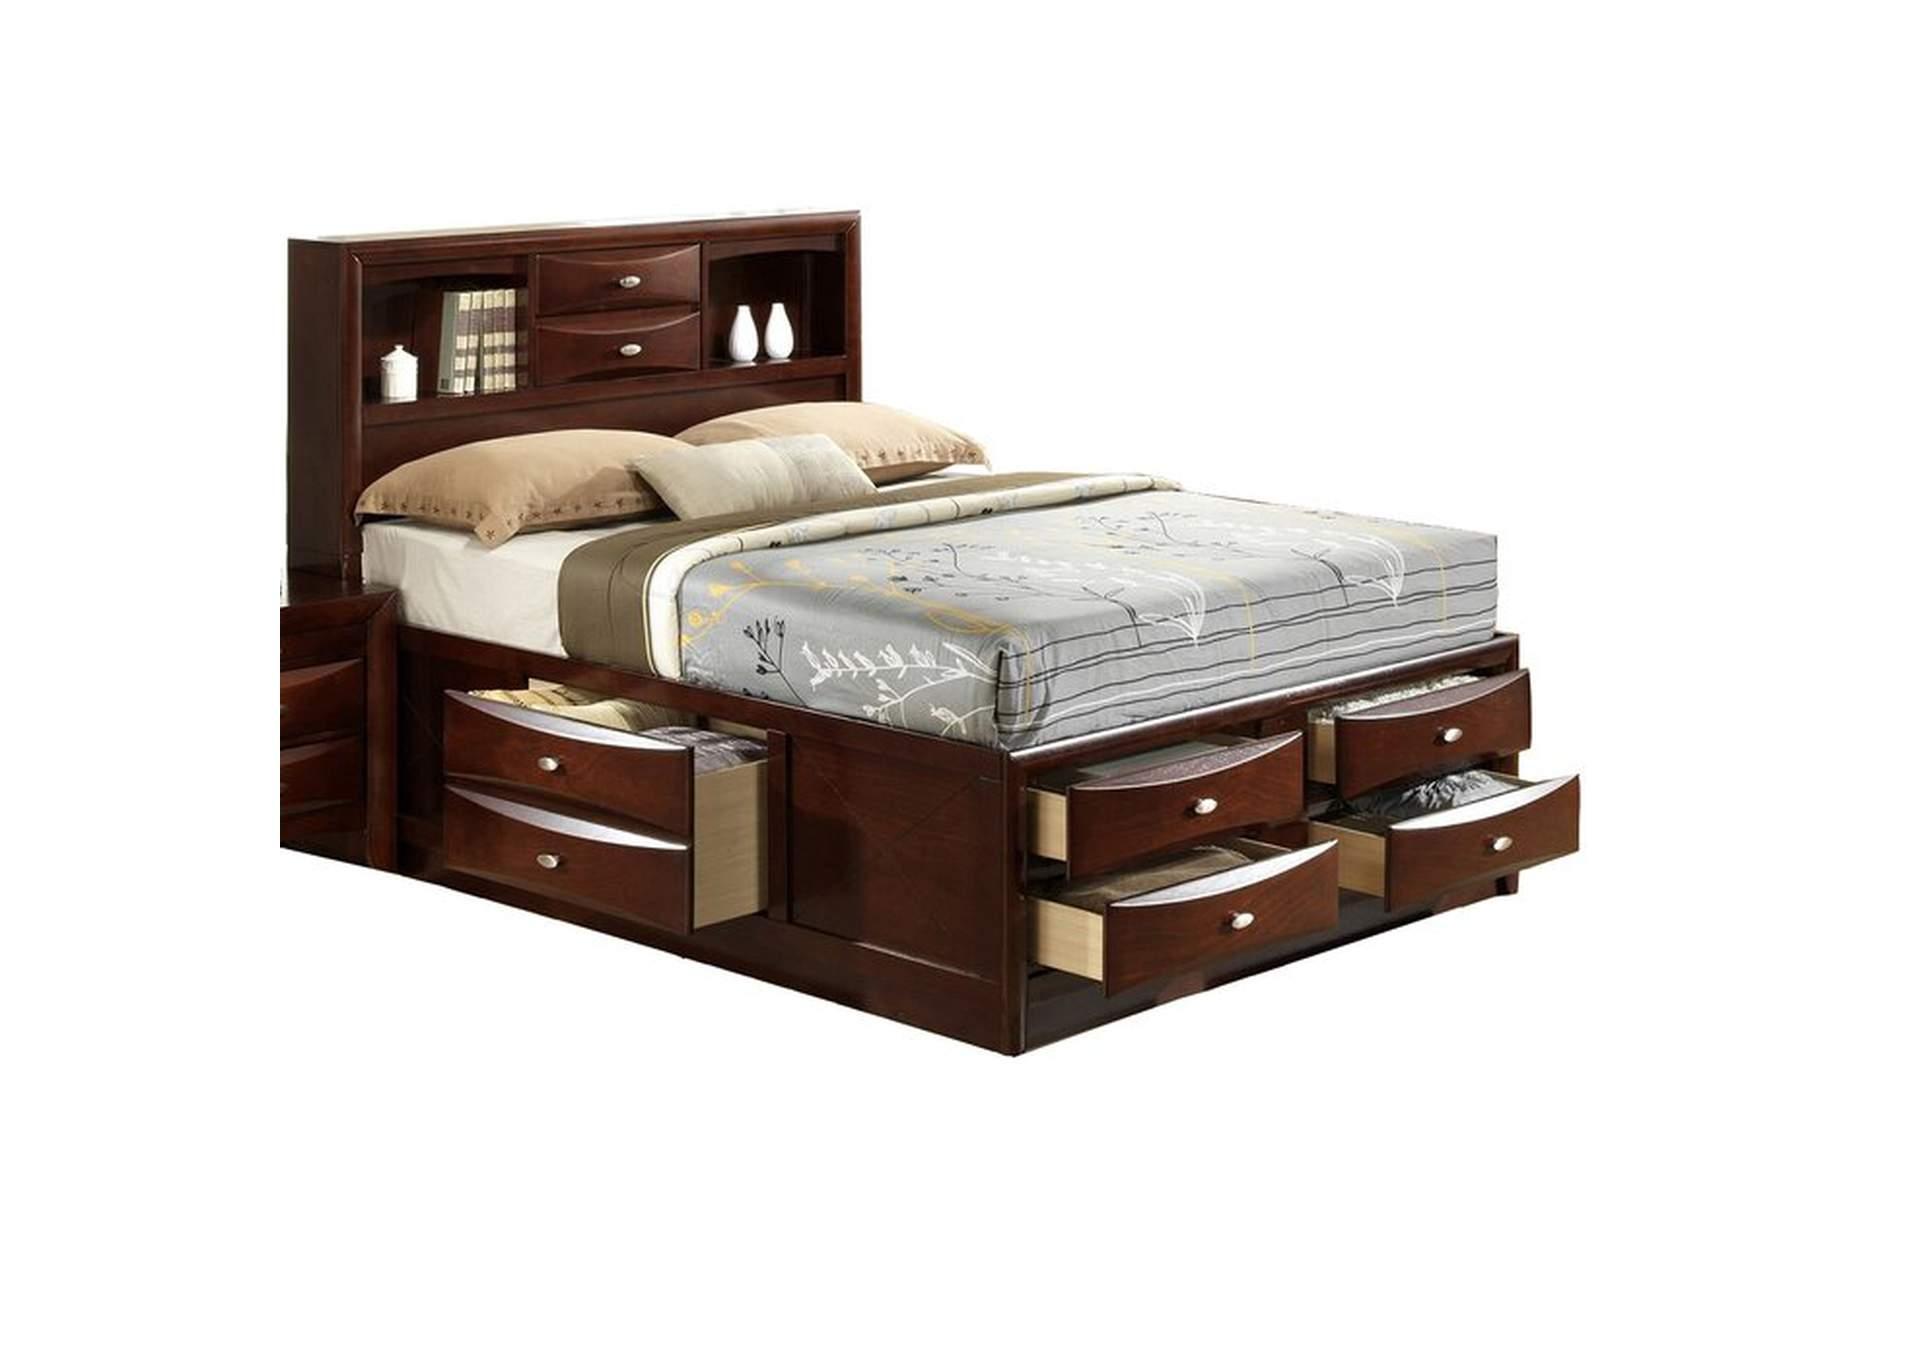 Contemporary, Modern Storage Bed EMILY GHF-808857672506 in Cherry 